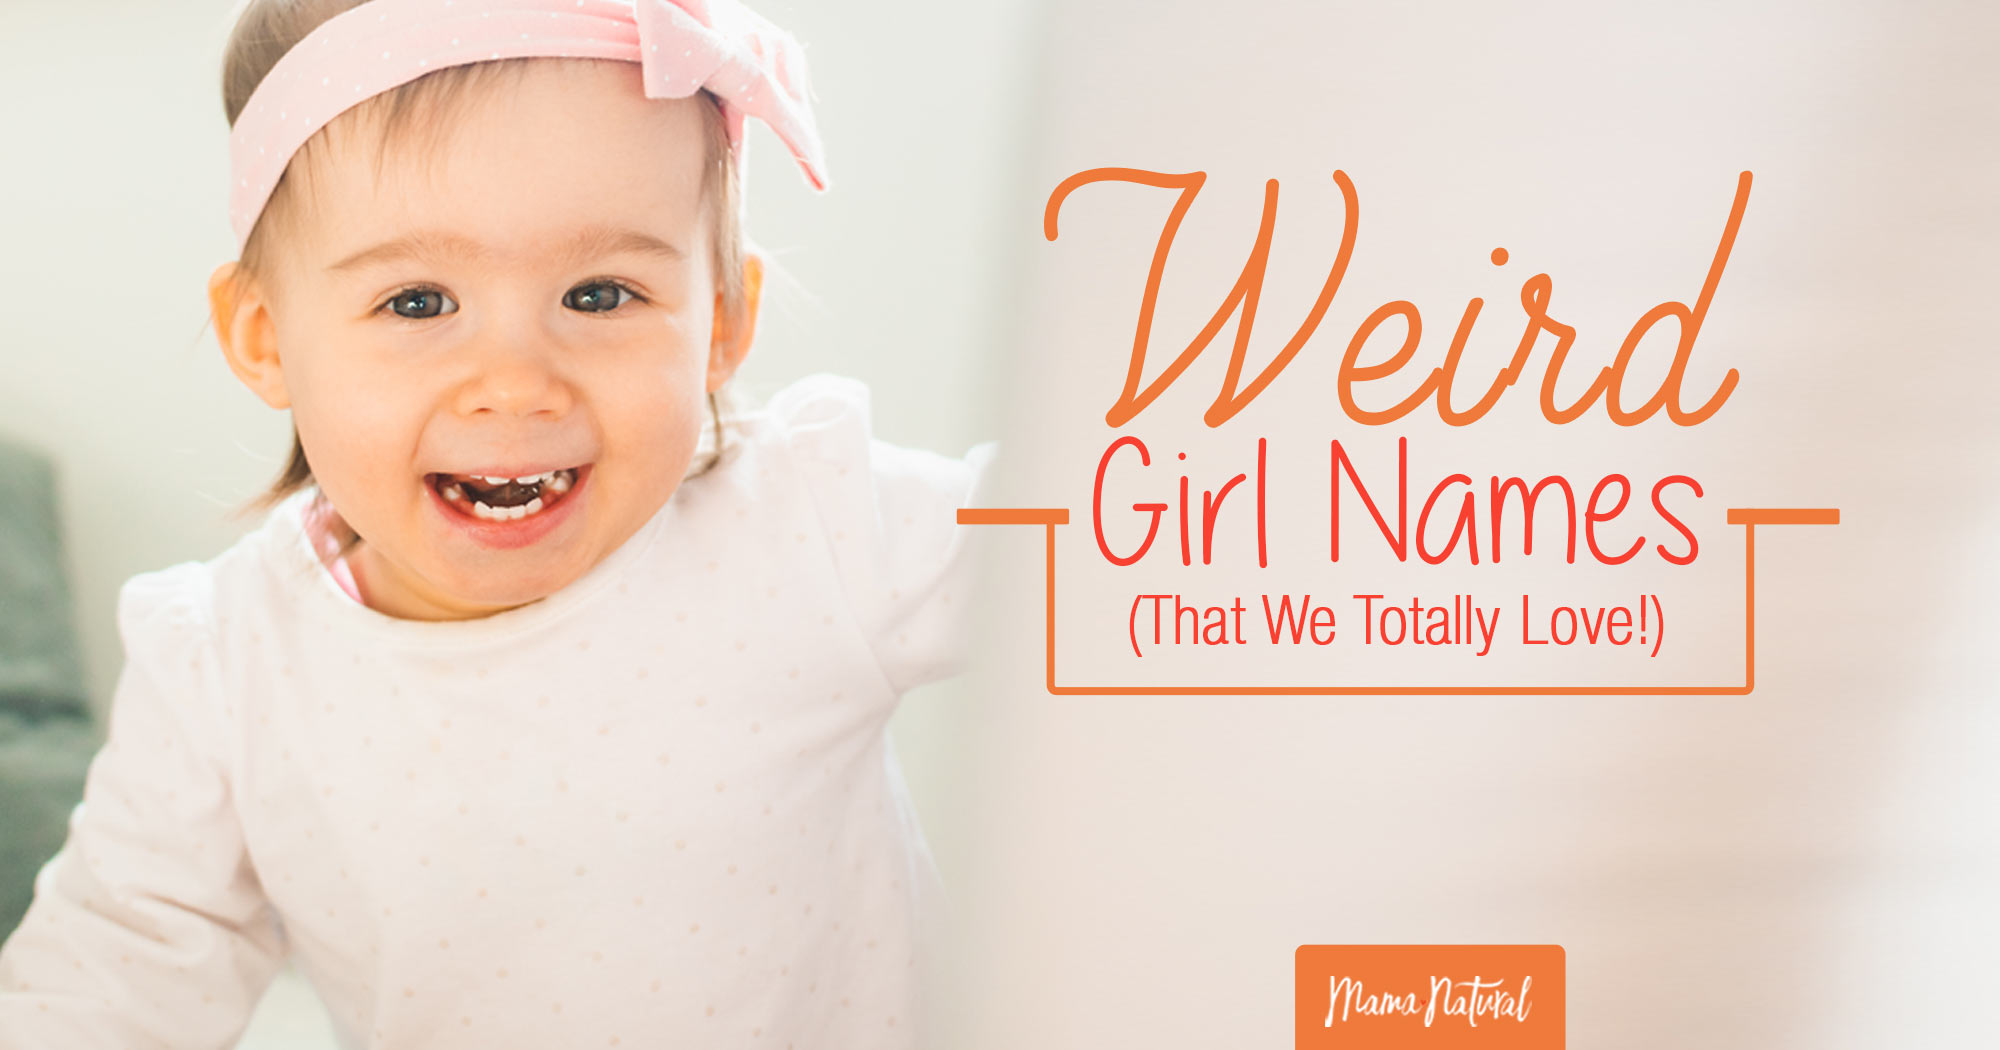 Weird Girl Names (That We Totally Love!) - Mama Natural